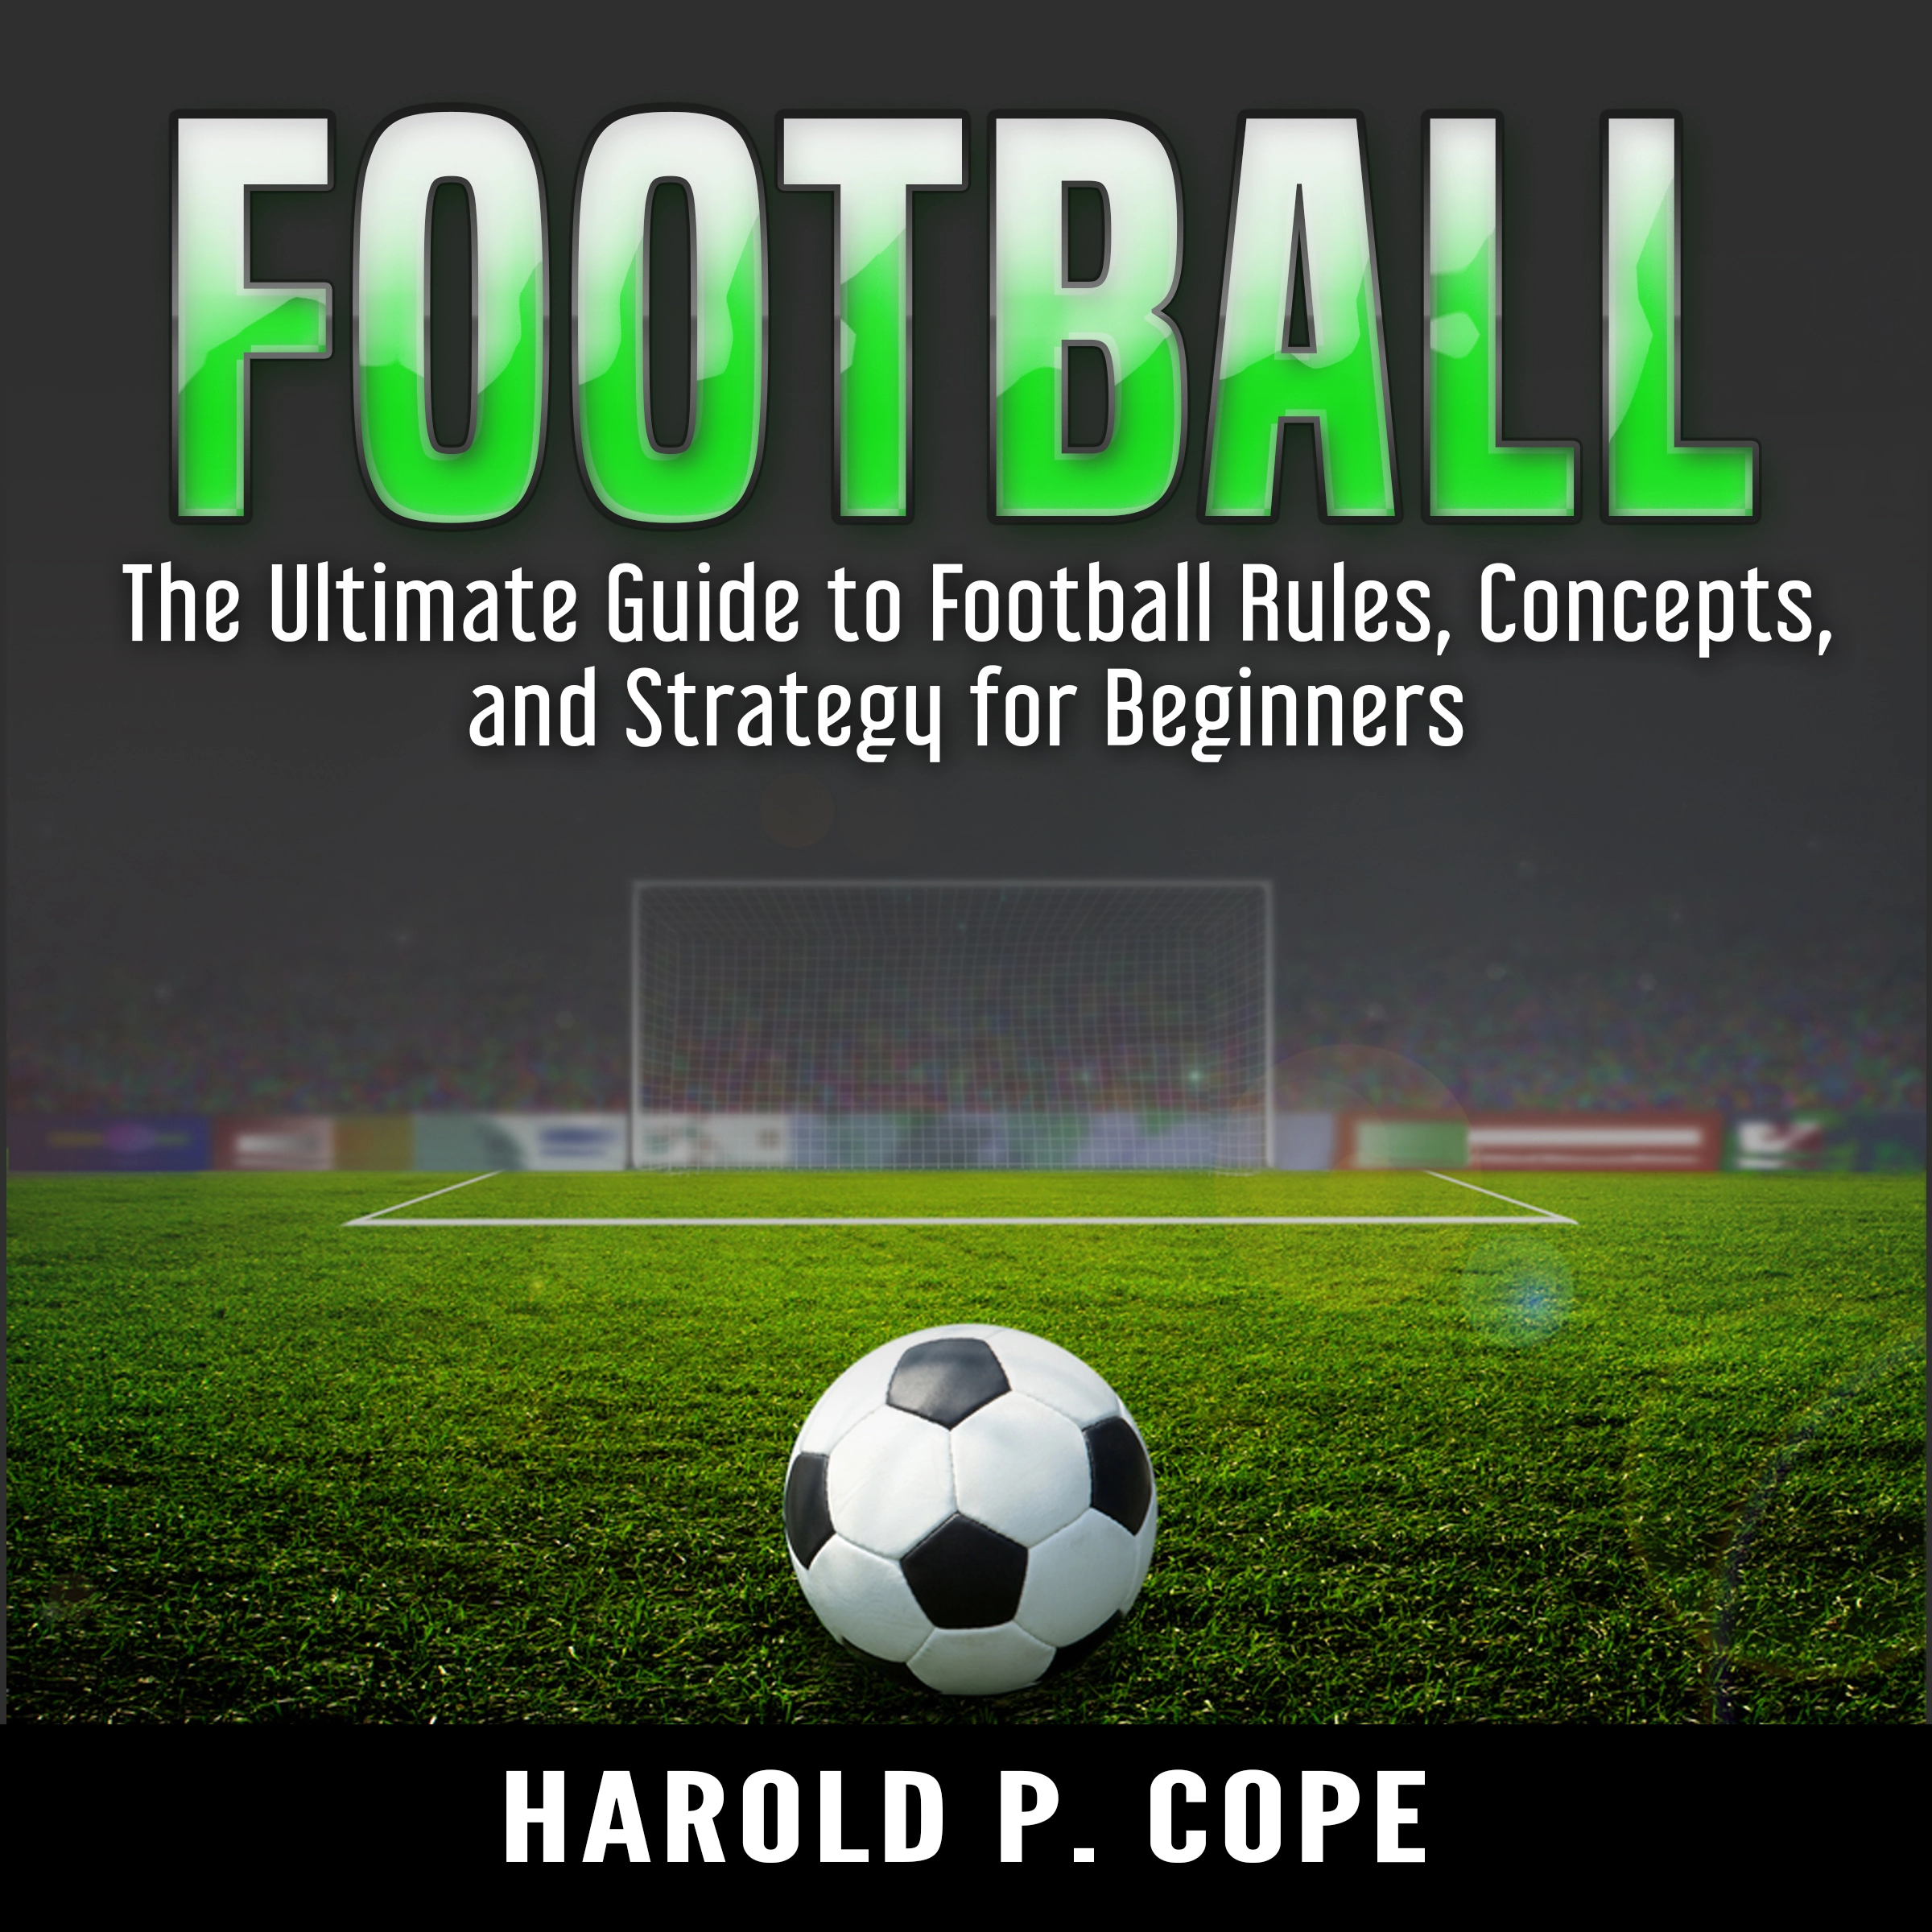 The Ultimate Guide to Football Rules, Concepts, and Strategy for Beginners Audiobook by Harold P. Cope